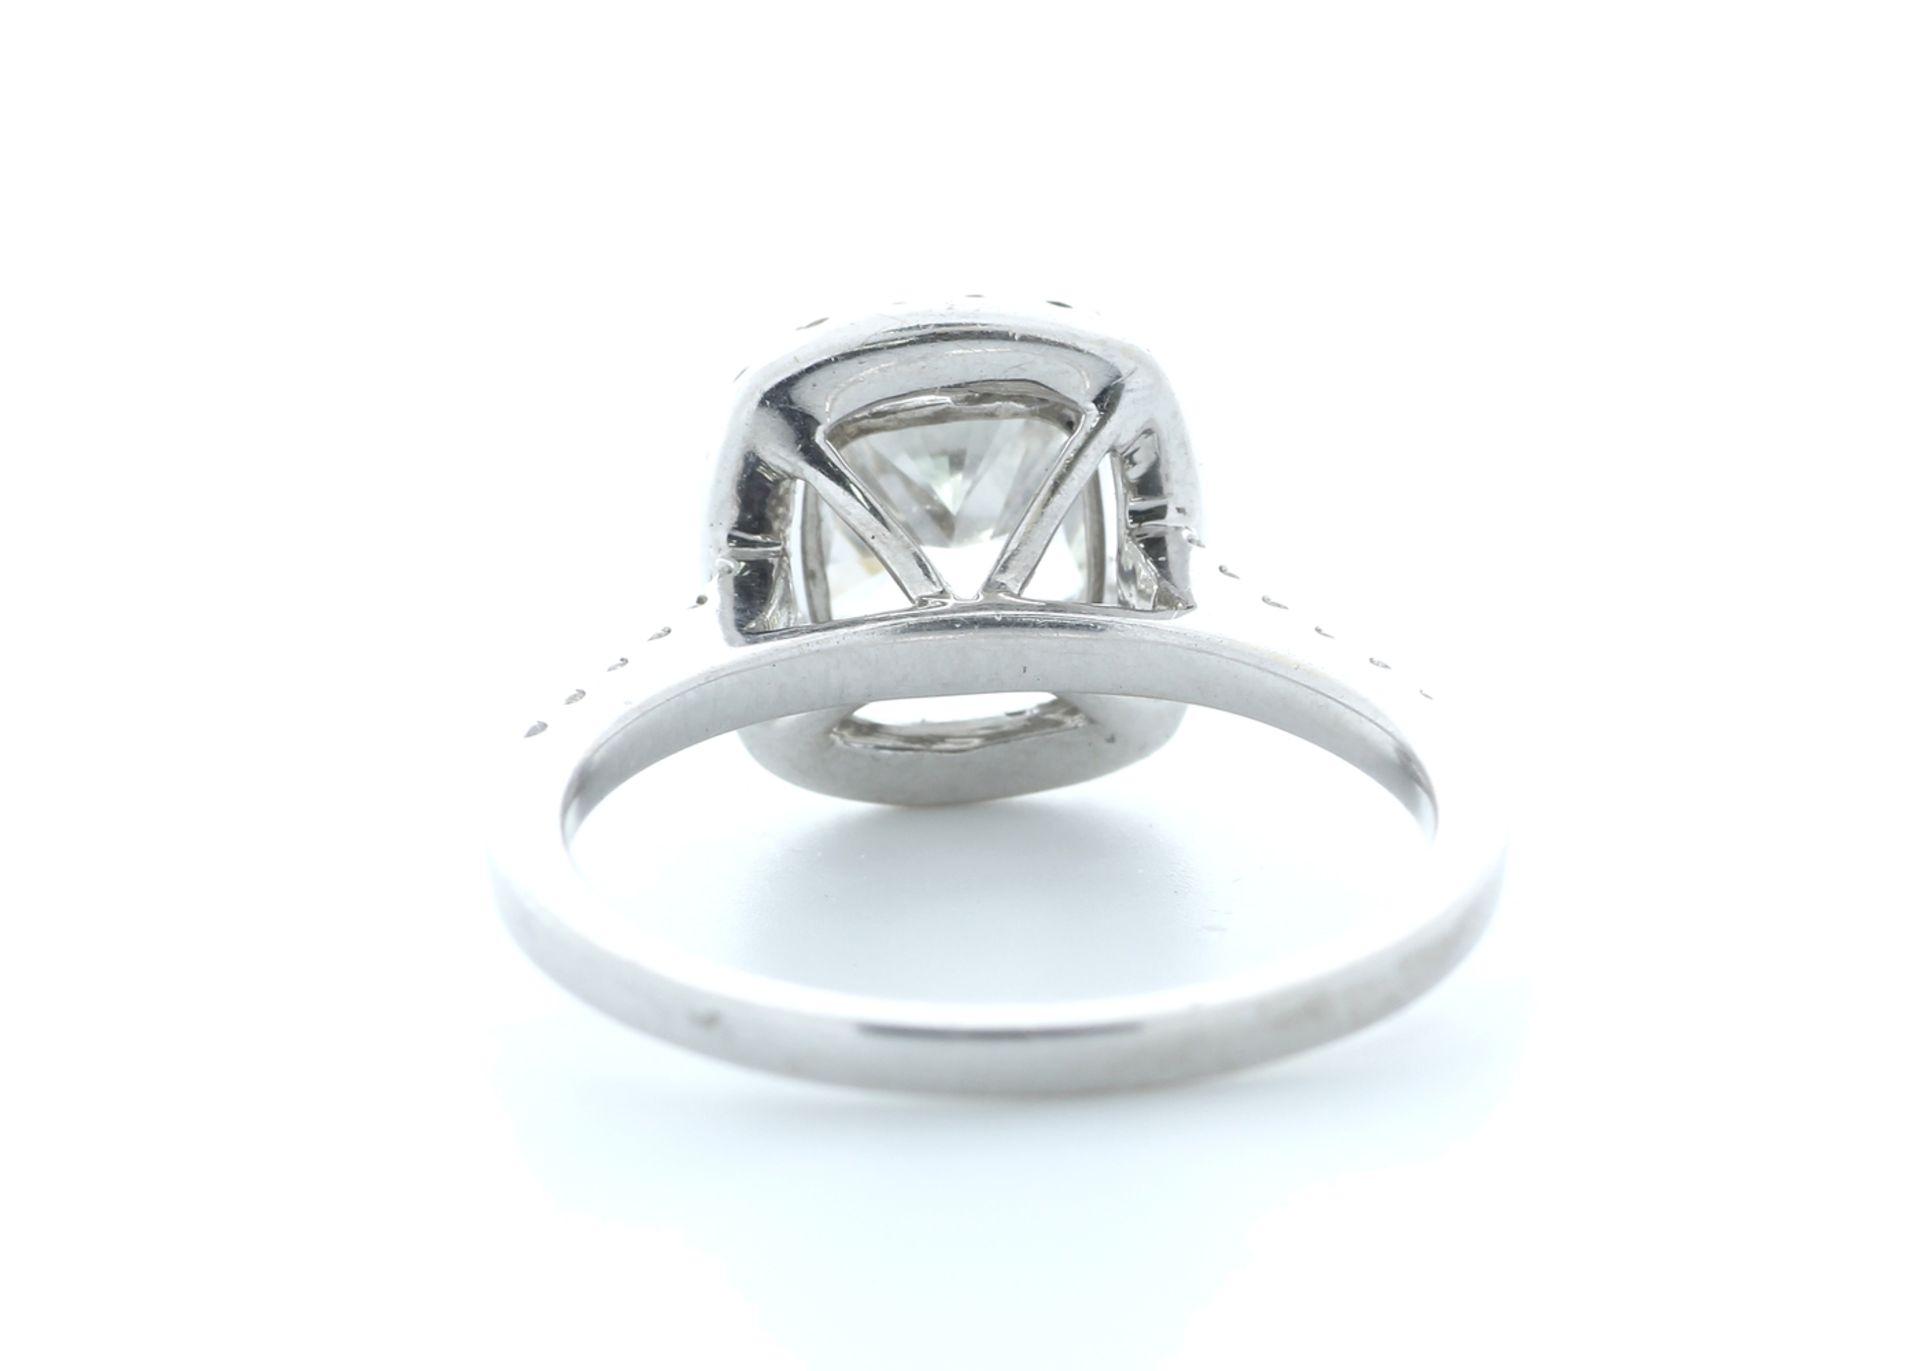 18ct White Gold Single Stone With Halo Setting Ring 2.63 (2.13) Carats - Valued by IDI £56,000. - Image 3 of 5